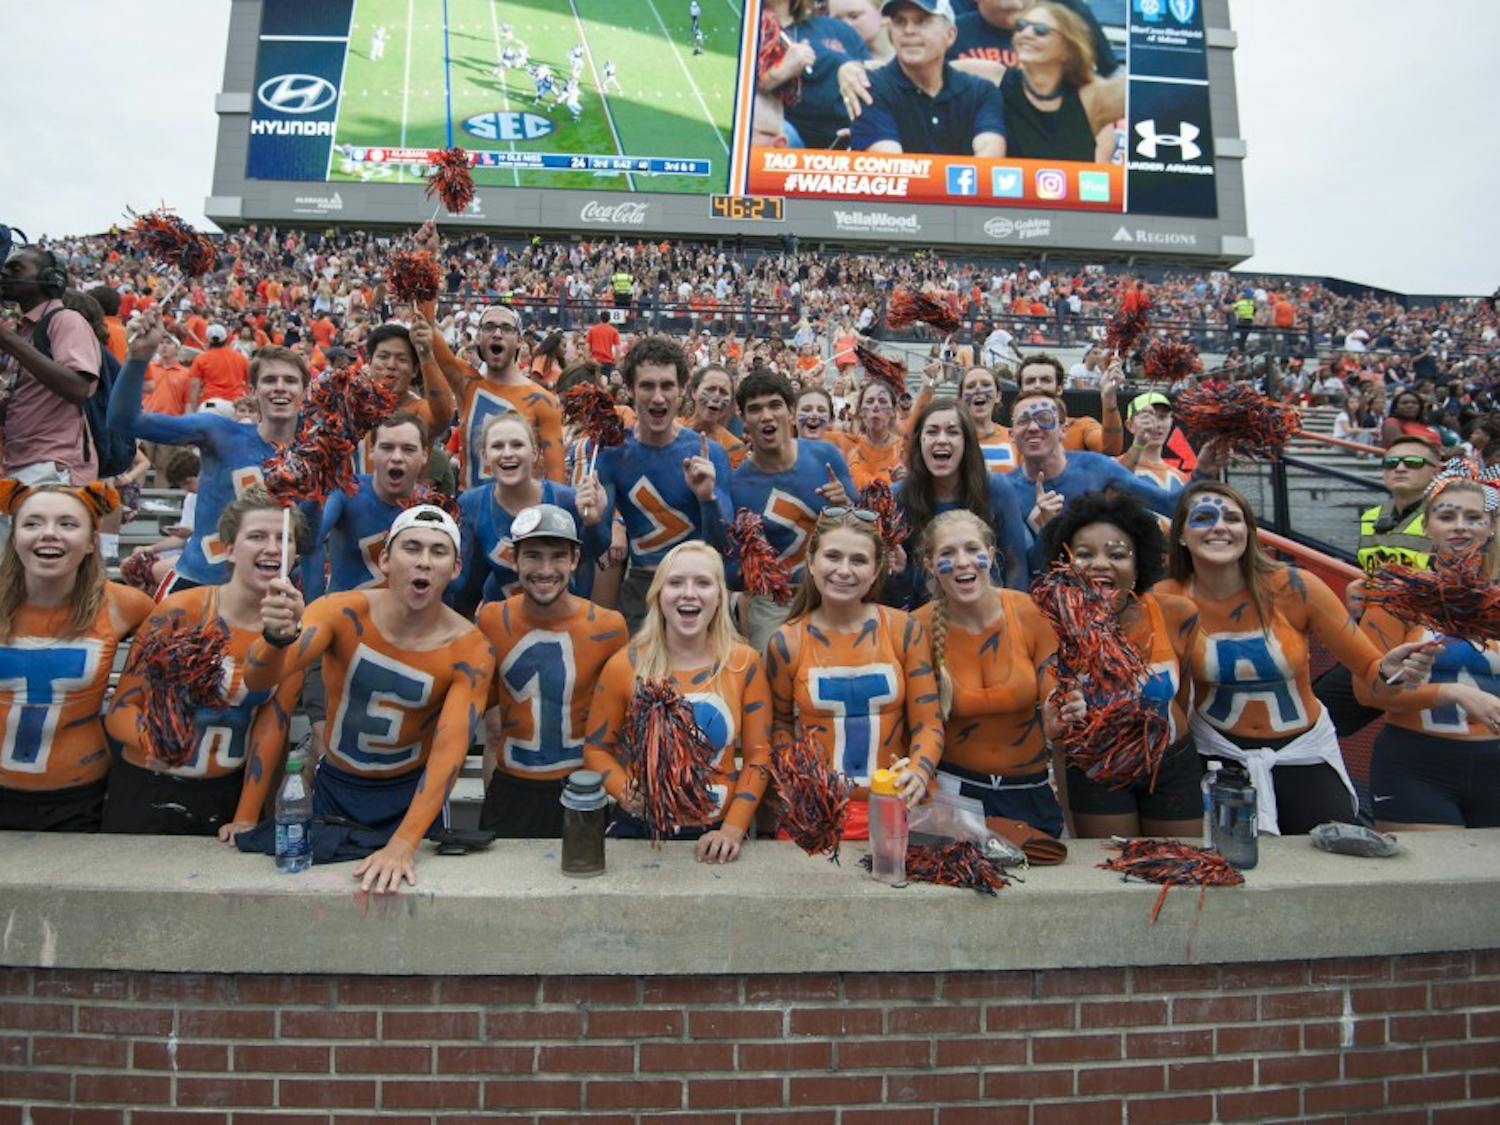 Students painted up prior the Auburn Vs. Texas A&M football game at Jordan-Hare Stadium on Saturday, Sept 17, 2016.